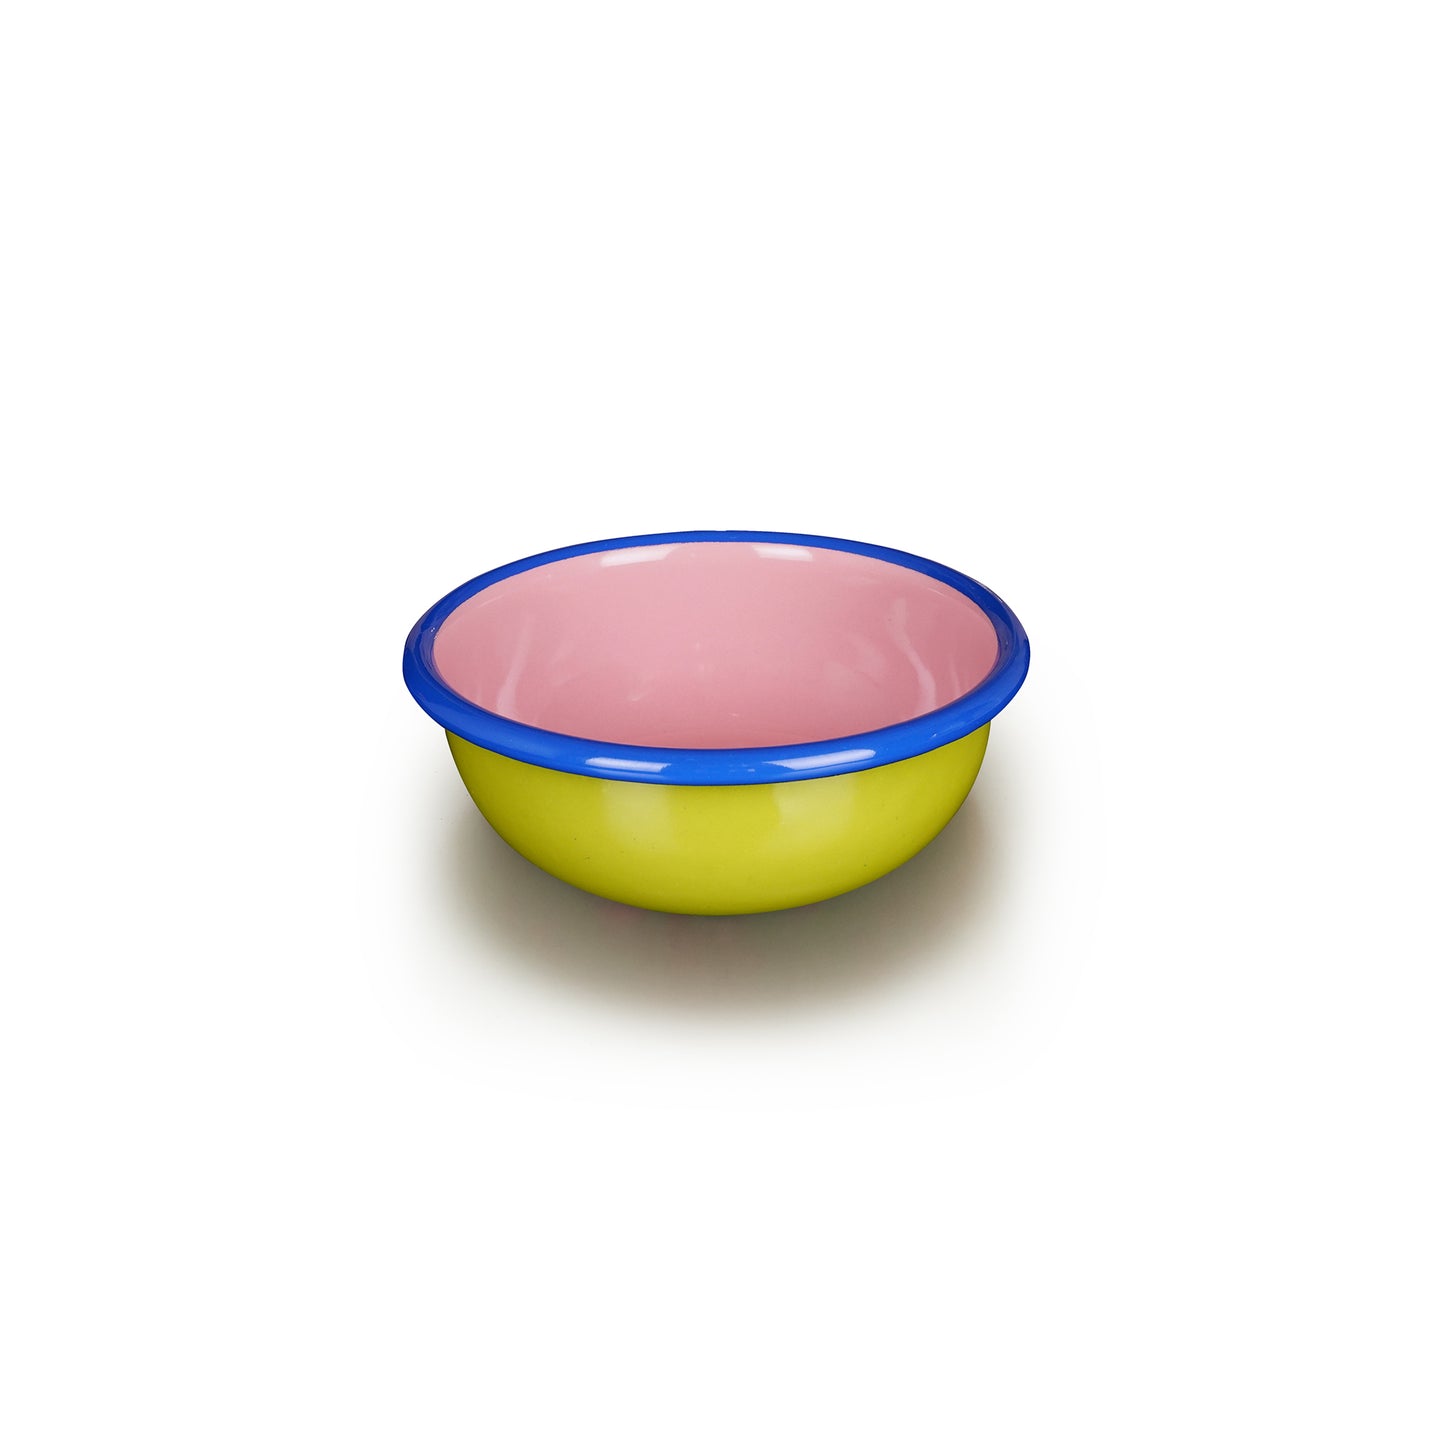 Colorama Bowl 5.25" Chartreuse and Soft Pink with Electric Blue Rim